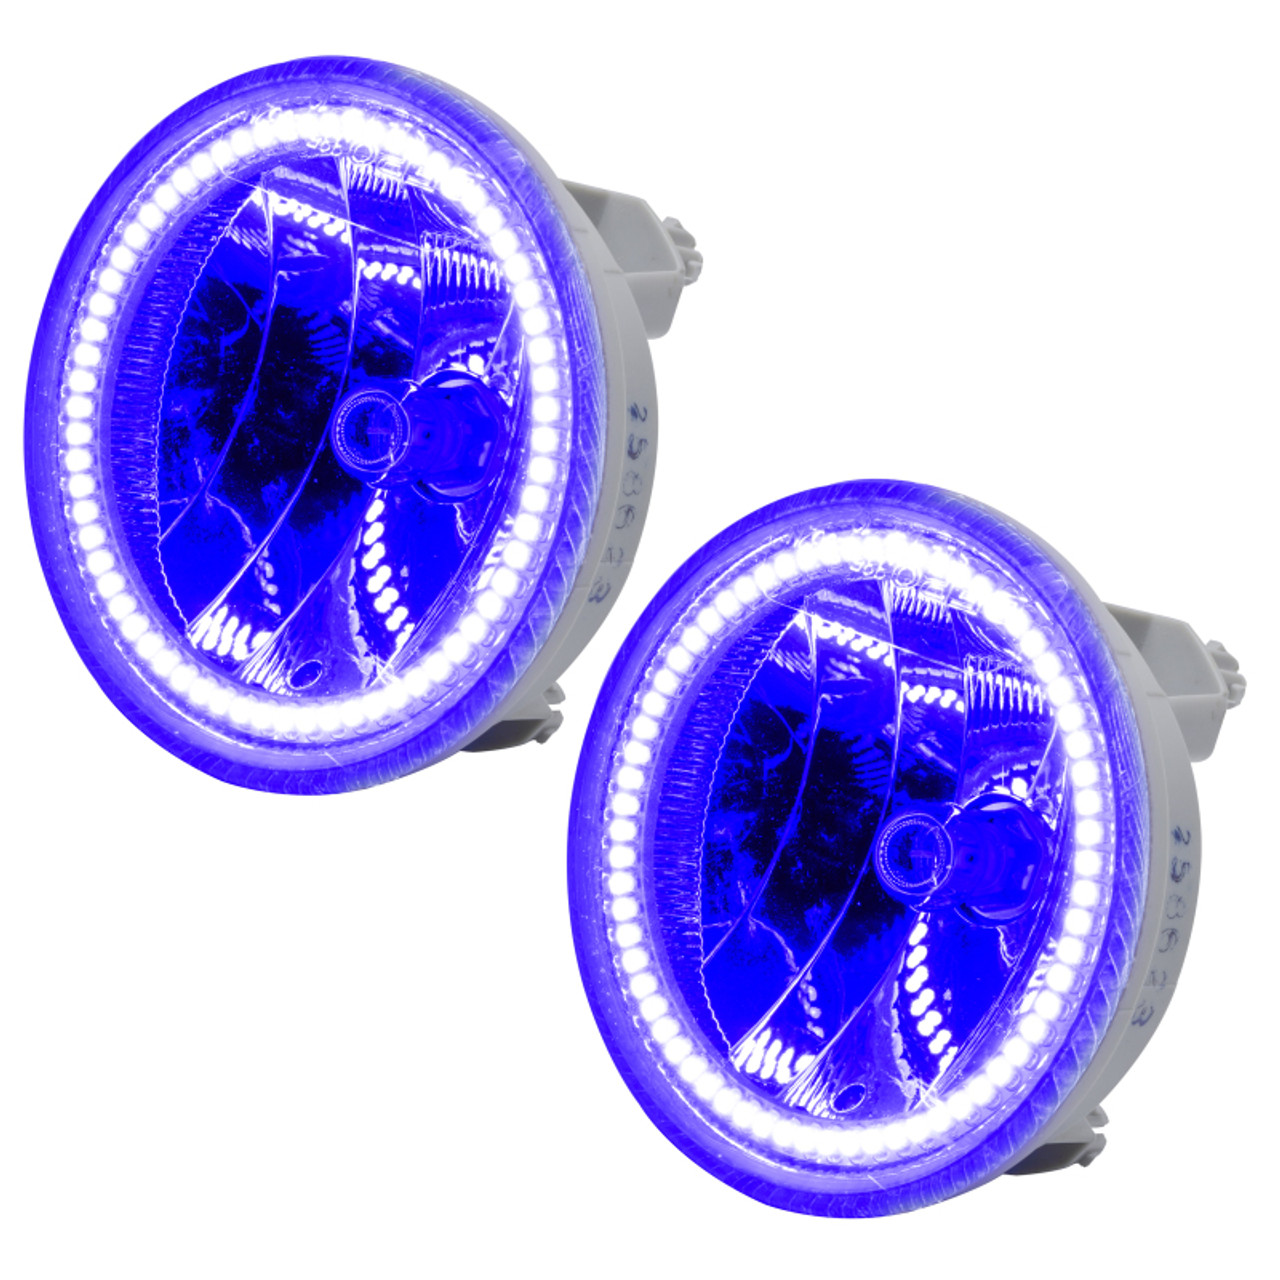 Oracle 10-13 Chevrolet Camero SMD Fog Light Assembly - UV/Purple - 7004-007 Photo - Primary